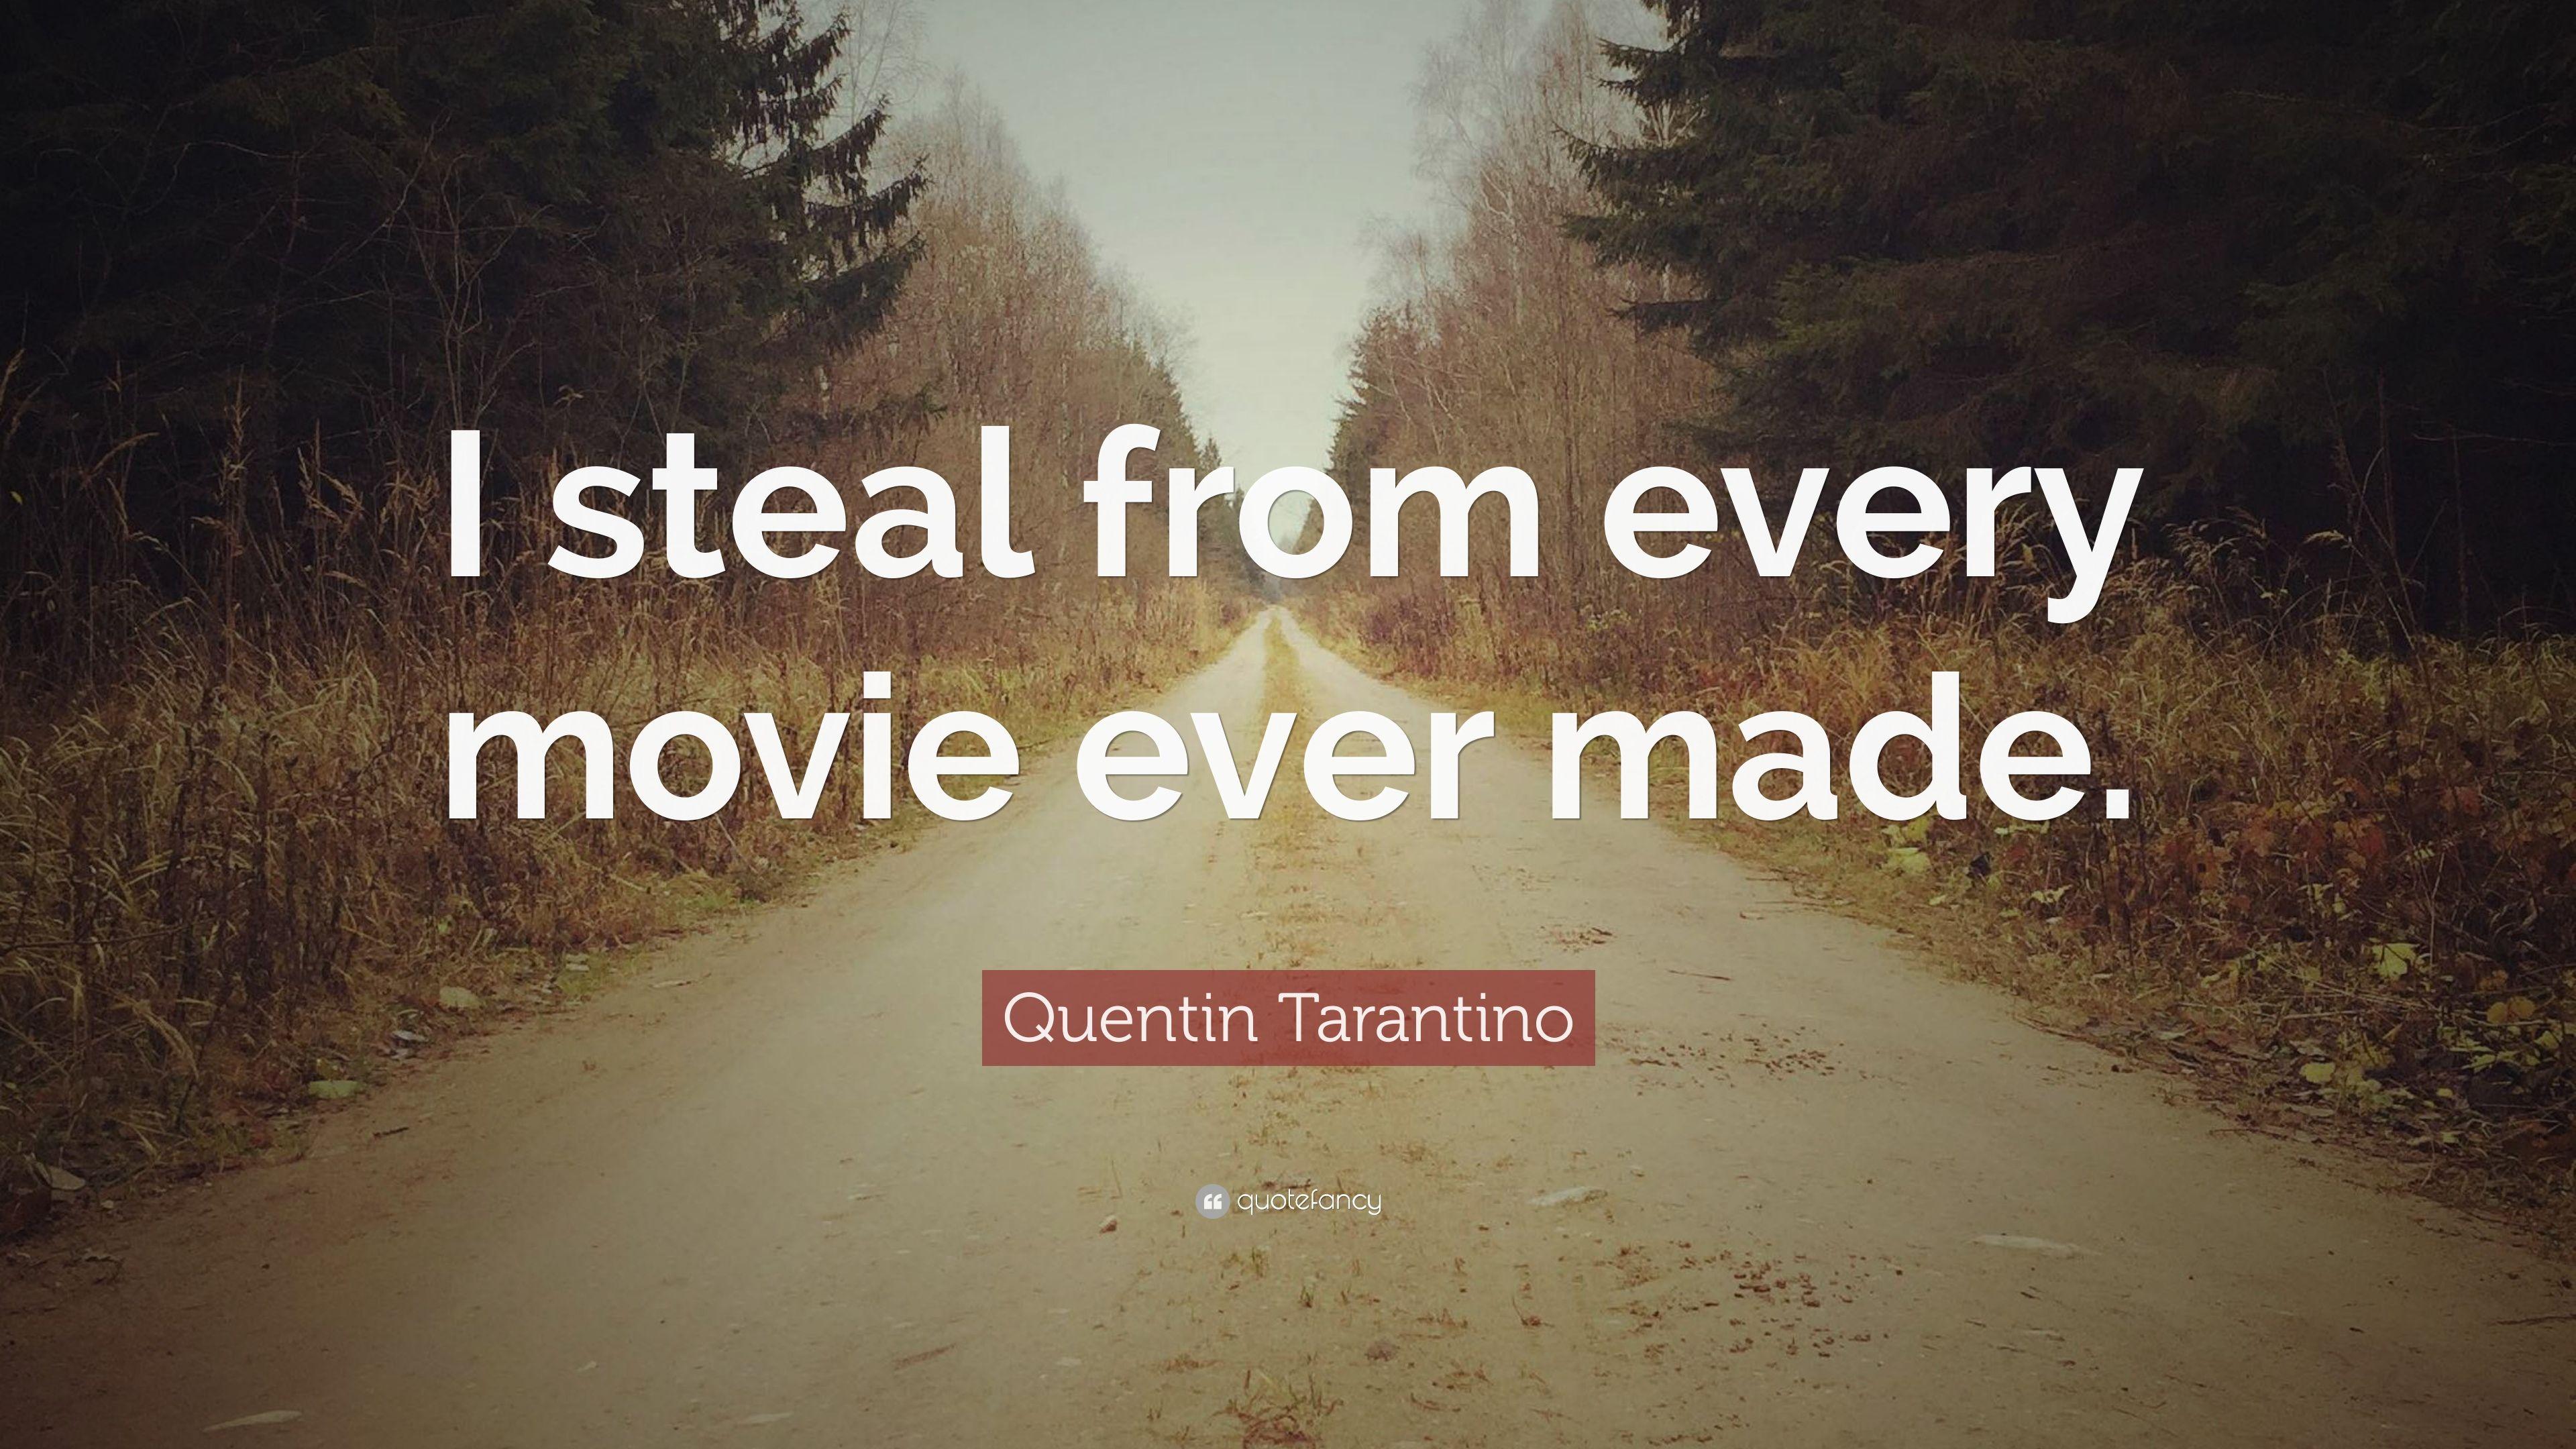 Quentin Tarantino Quote: “I steal from every movie ever made.” 12